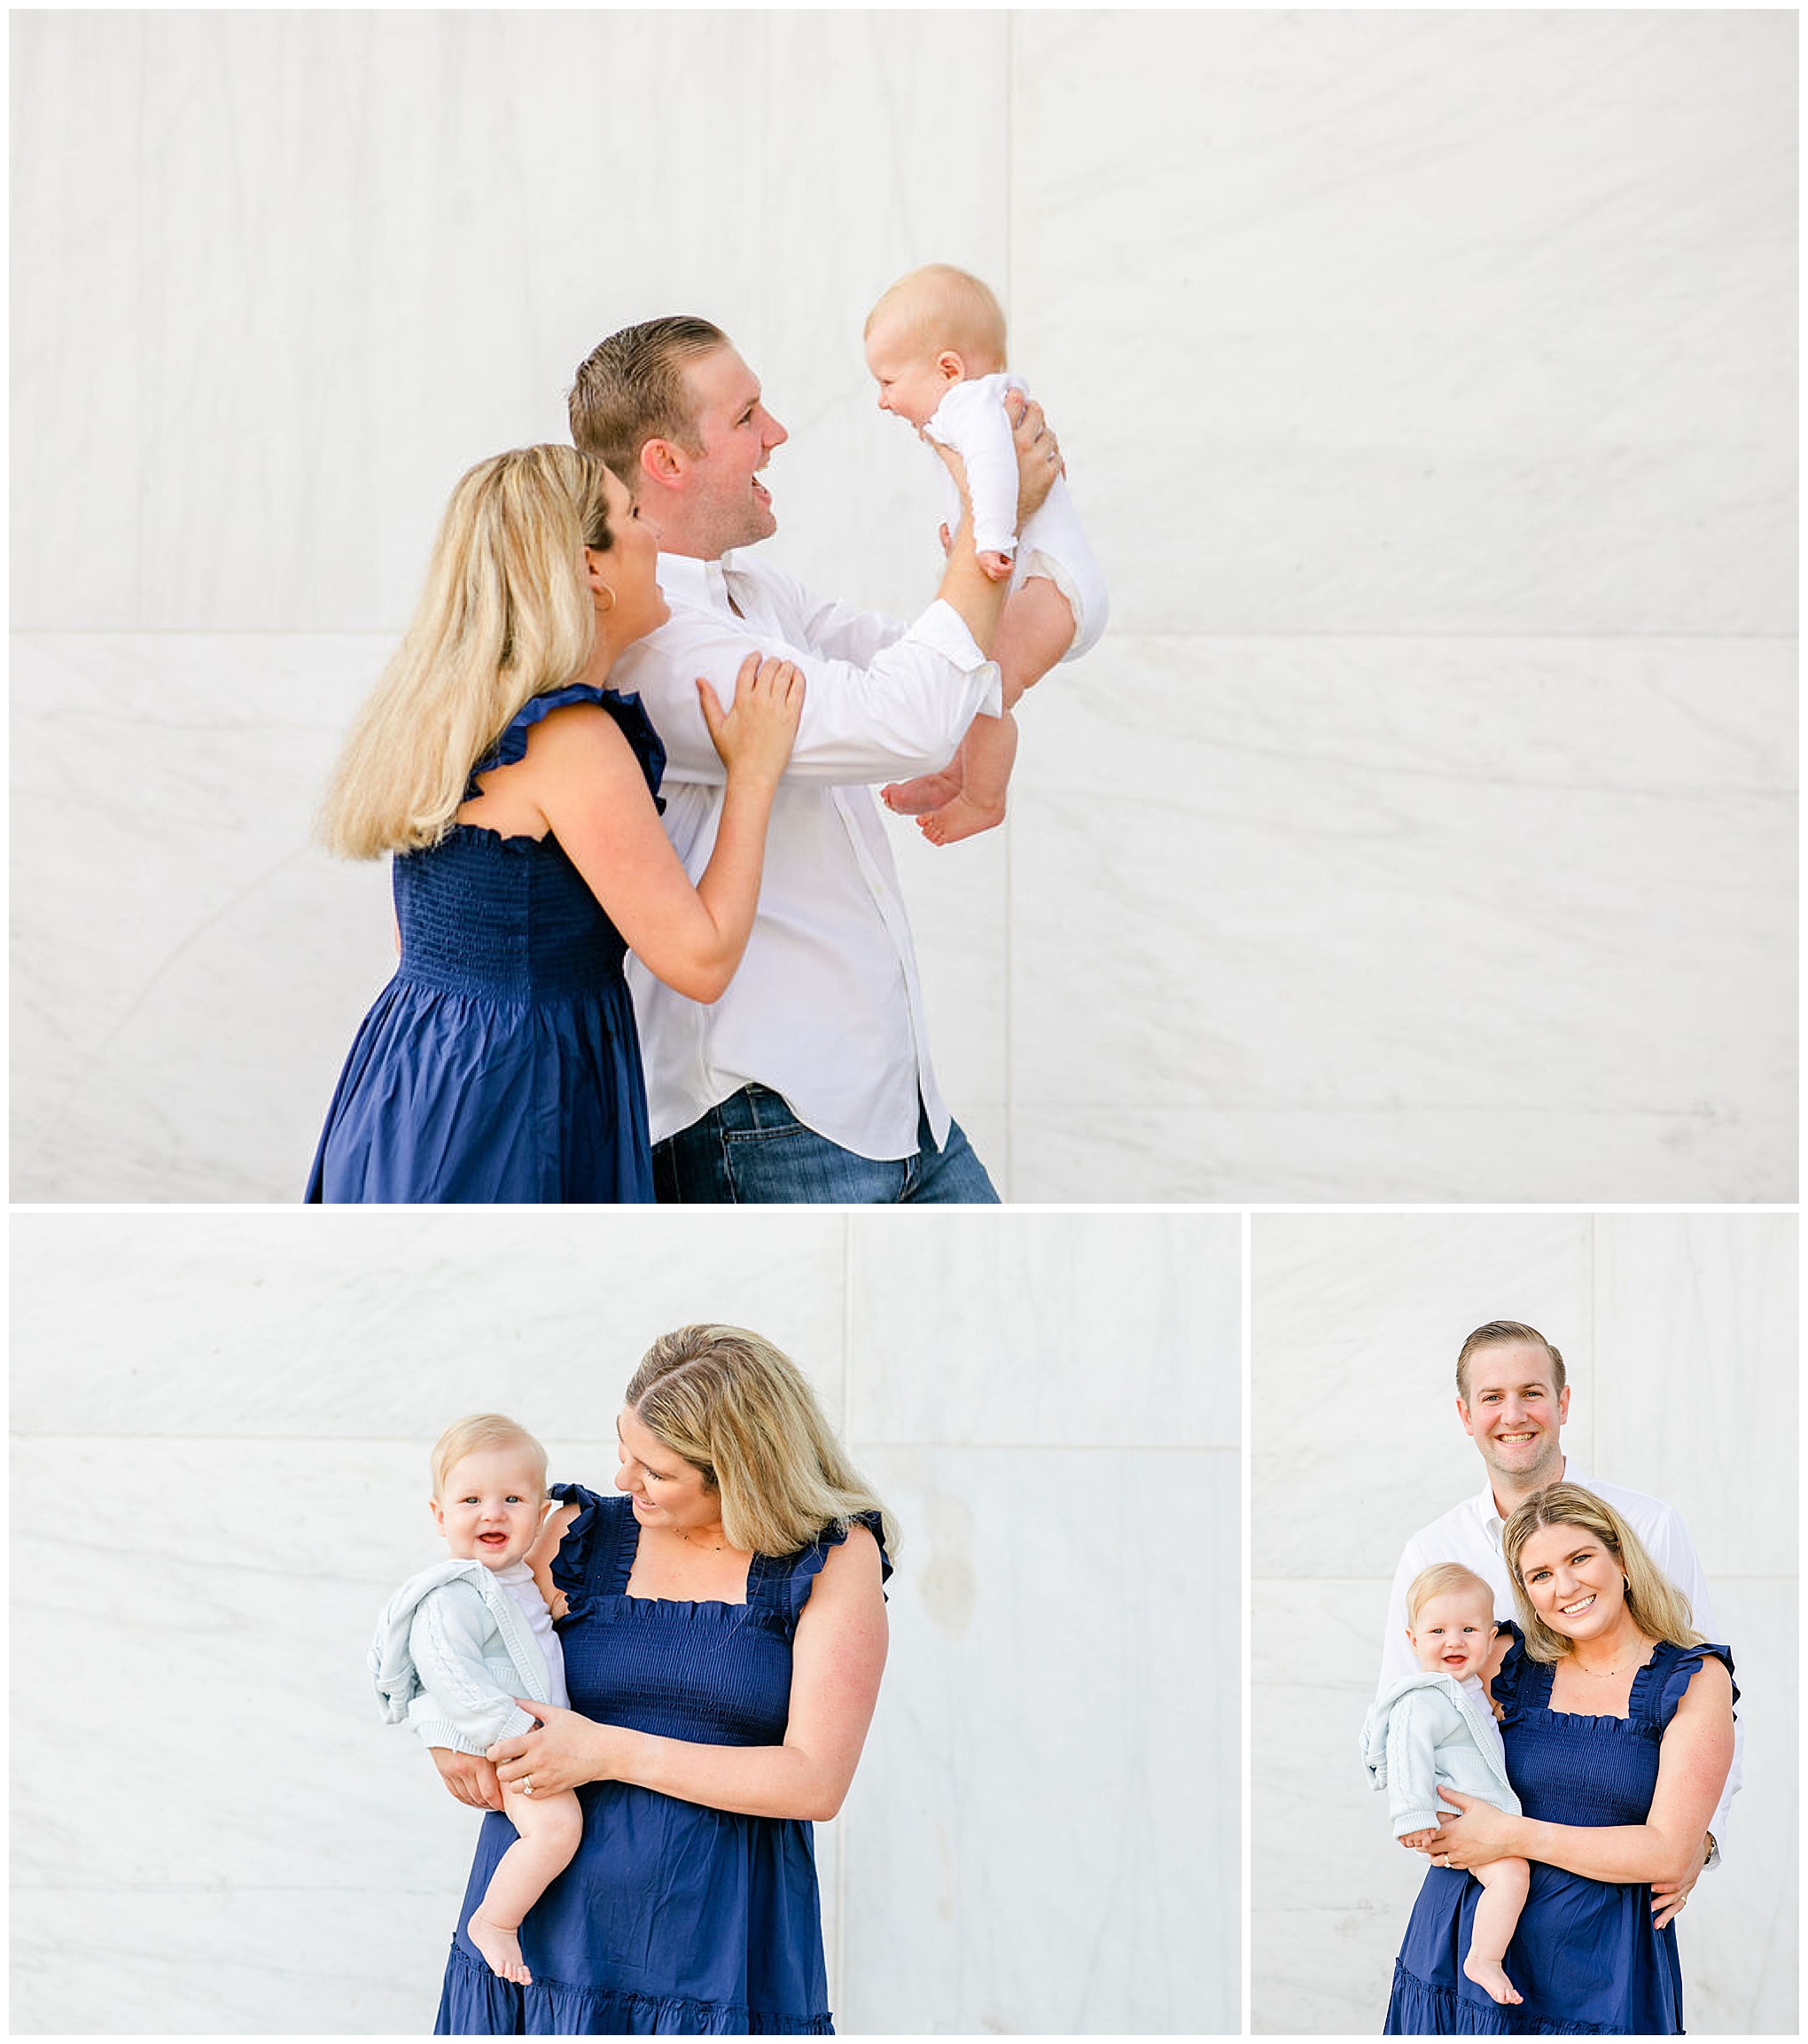 Kennedy Center family portraits, DC family portraits, classic DC family photos, casual family portraits, spring family portraits, Kennedy Center portraits, family of three, couple with baby, Rachel E.H. Photography, man holding baby up, baby laughing, mom holding baby, mom looking at baby